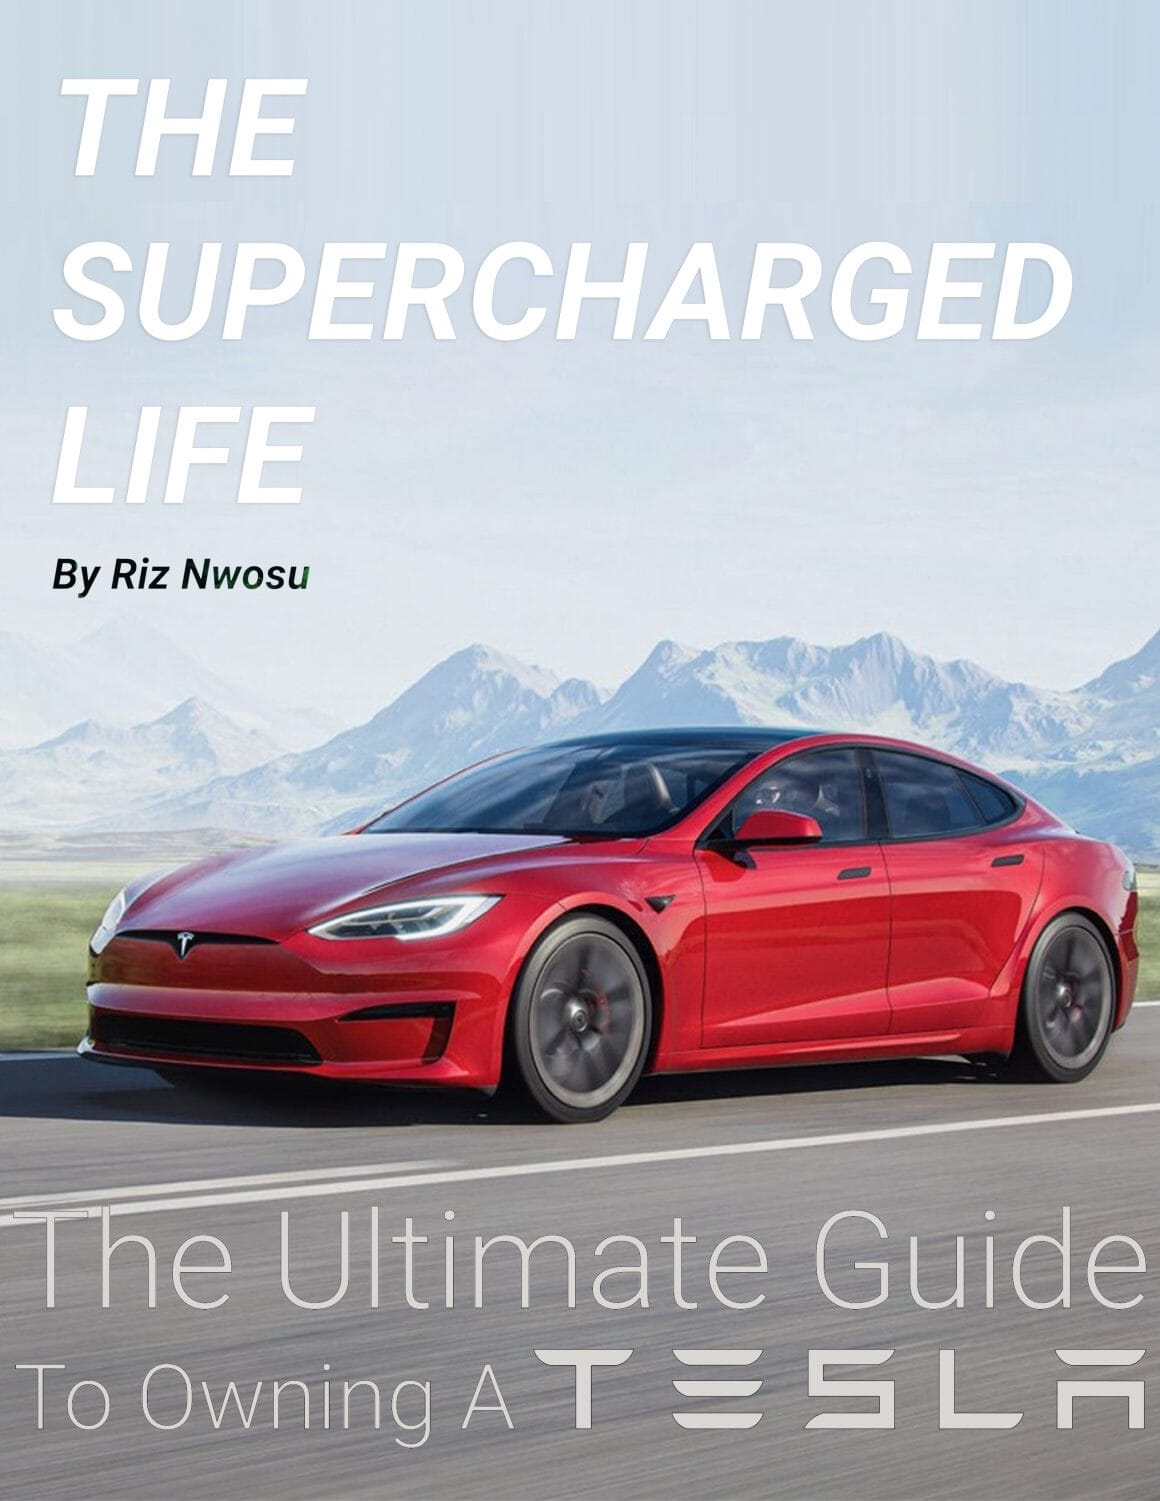 THE SUPERCHARGED LIFE: The Ultimate Guide To Owning A Tesla